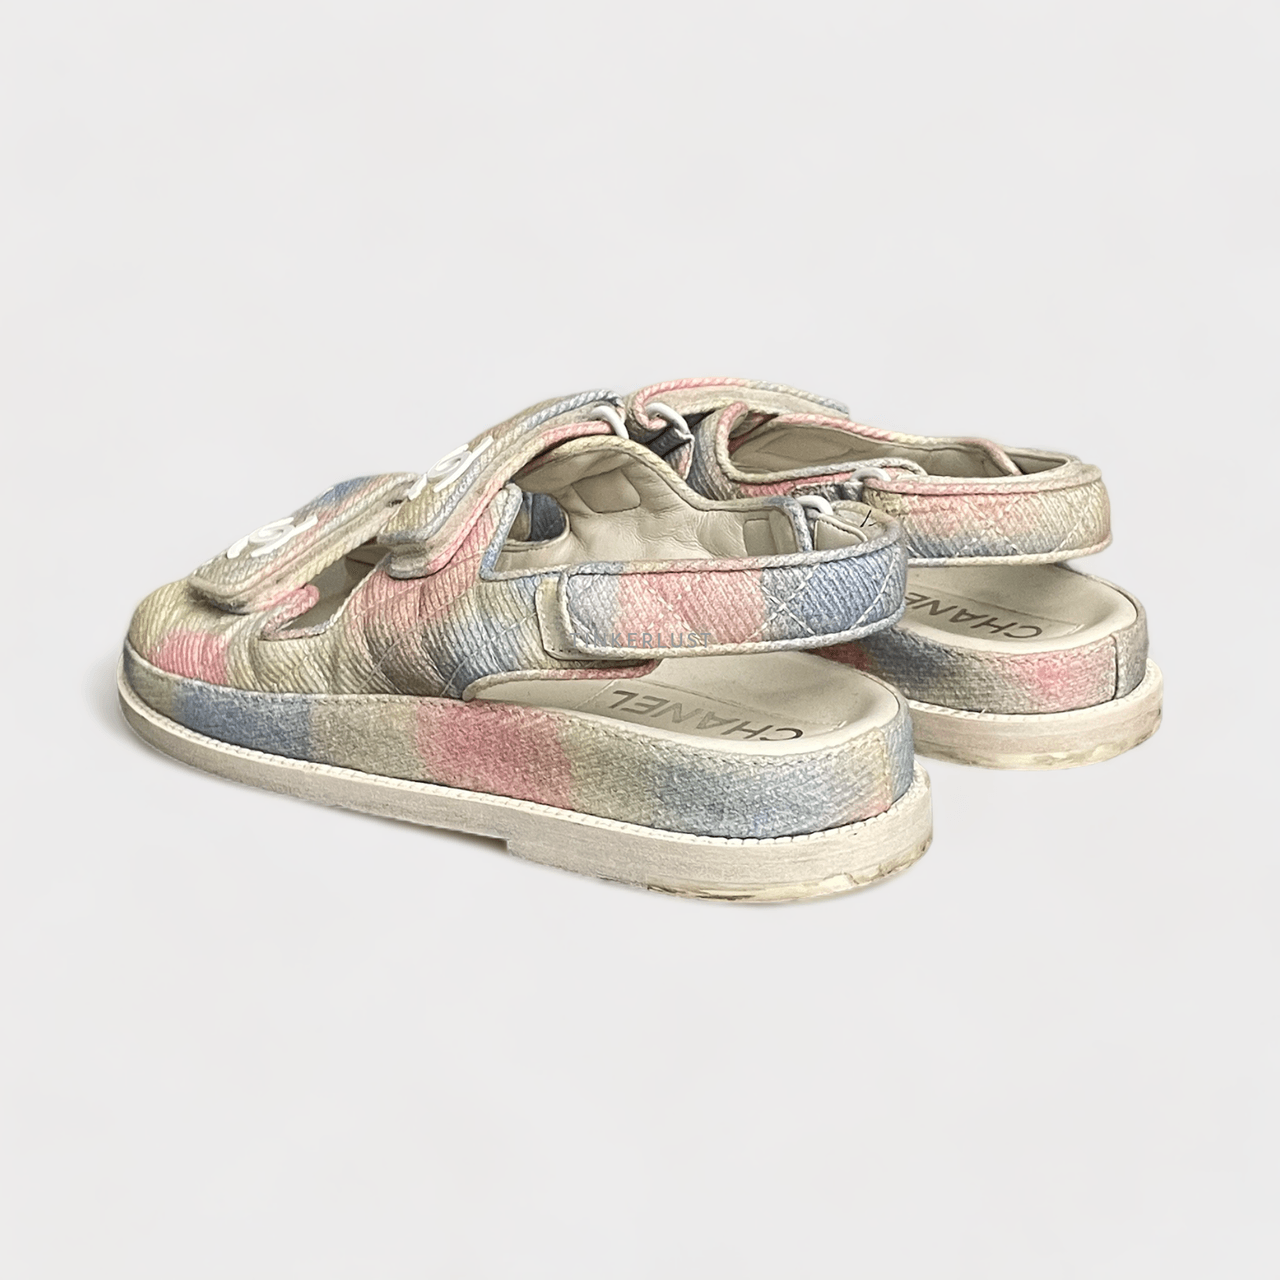 Chanel Dad Sandals Multicolor Printed Fabric Quilted Sandals